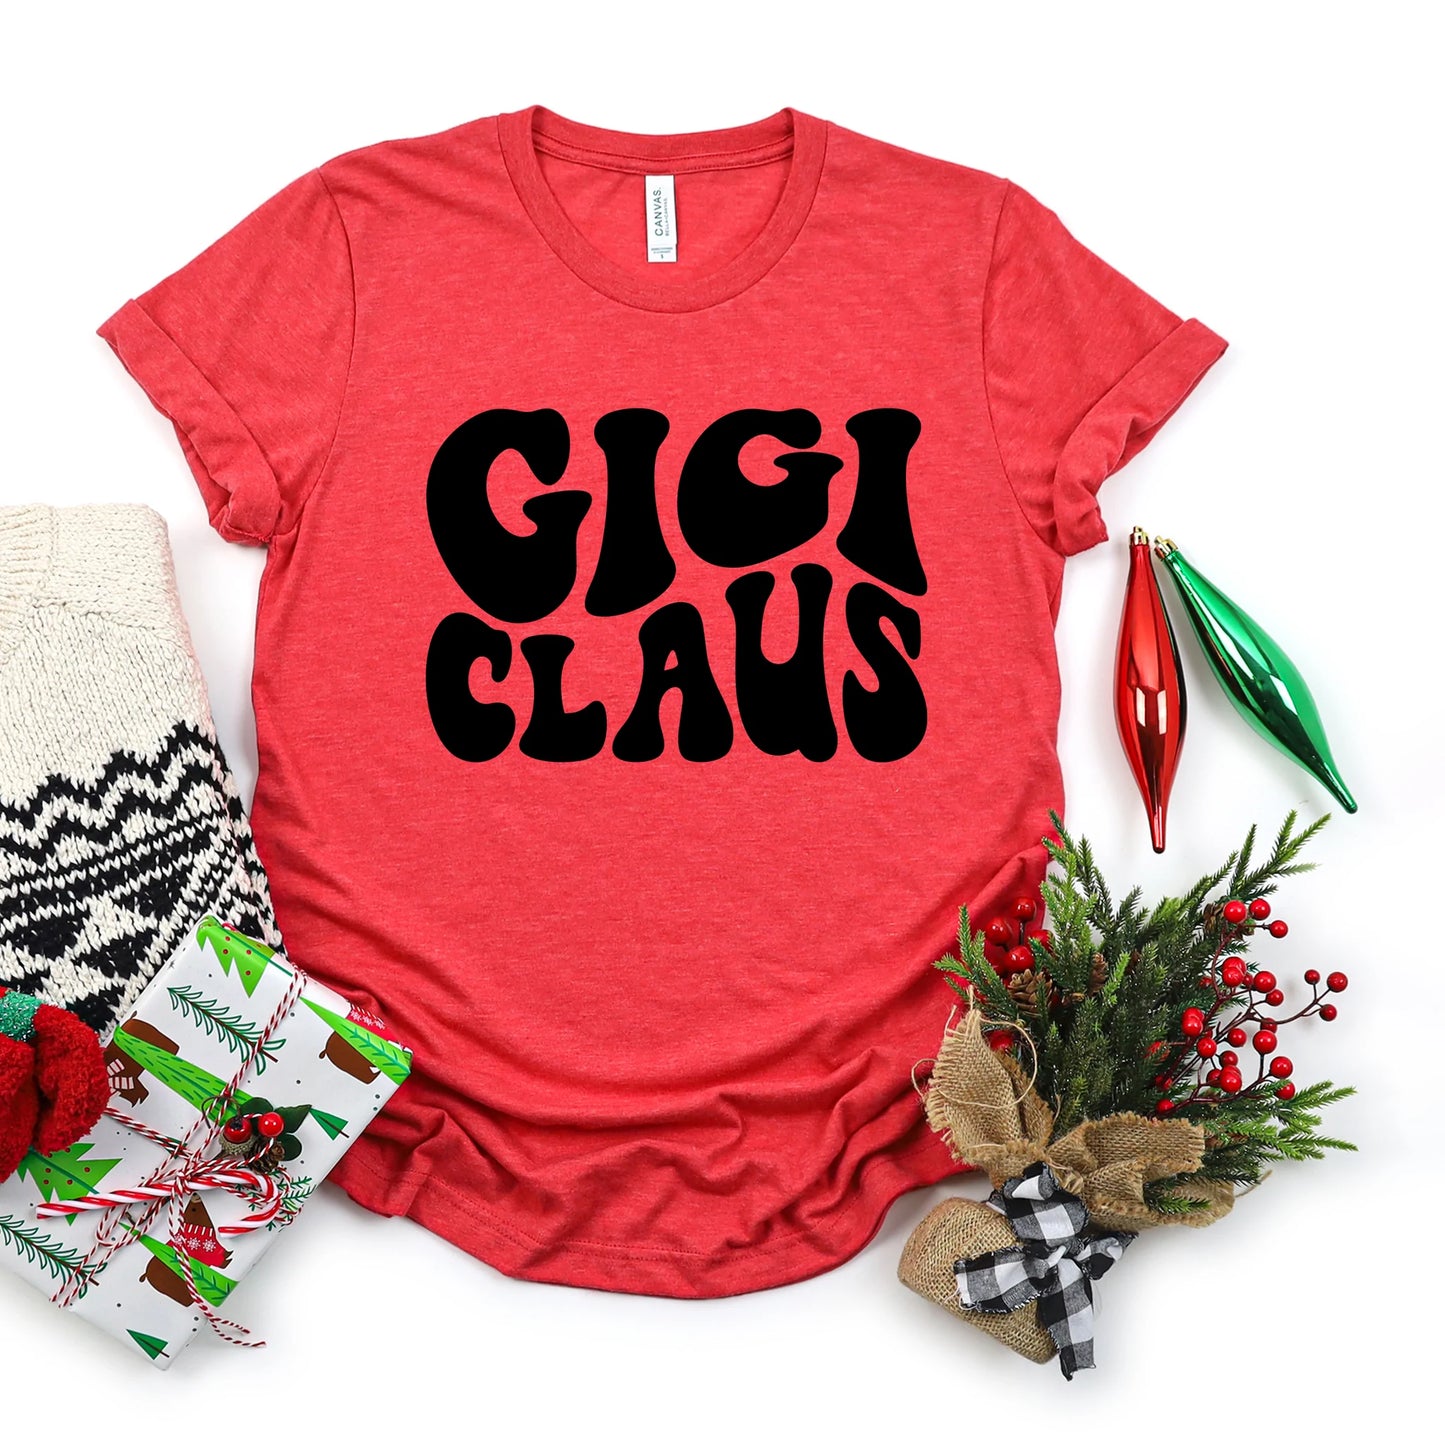 Gigi Claus Adult Graphic Tee, Heather Red